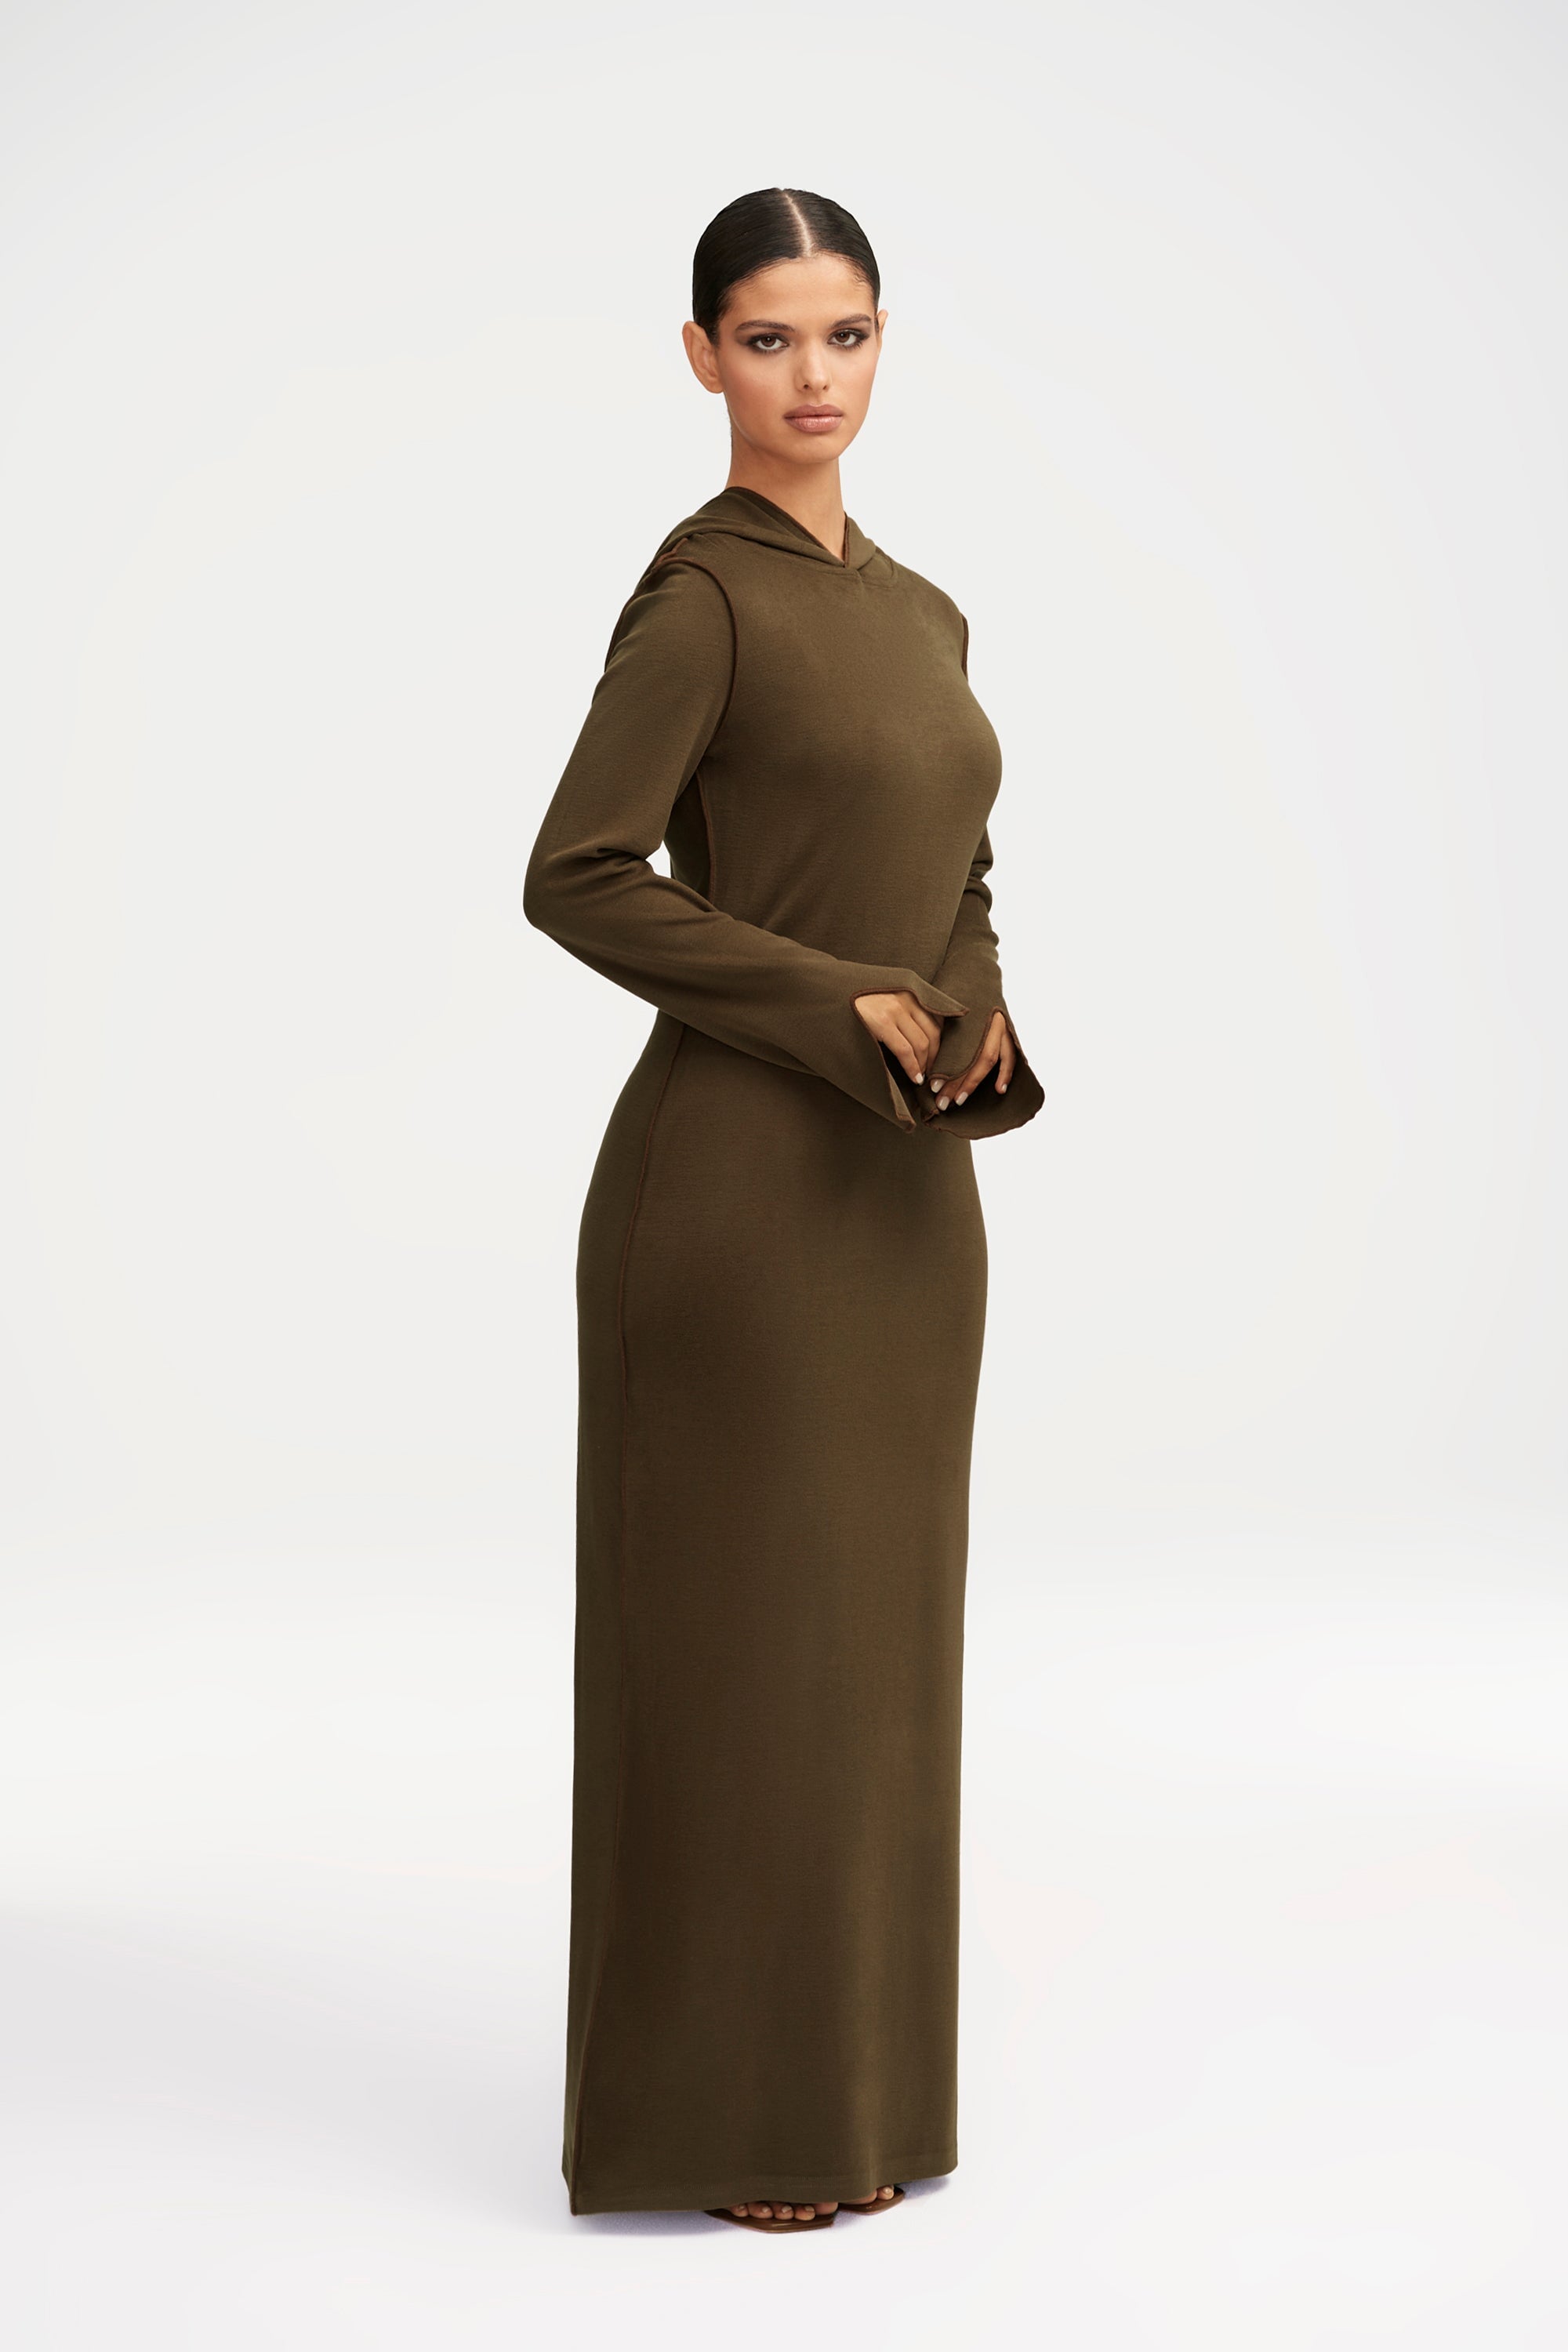 Olive Clothing - Brown Pleated Cord Maxi Dress